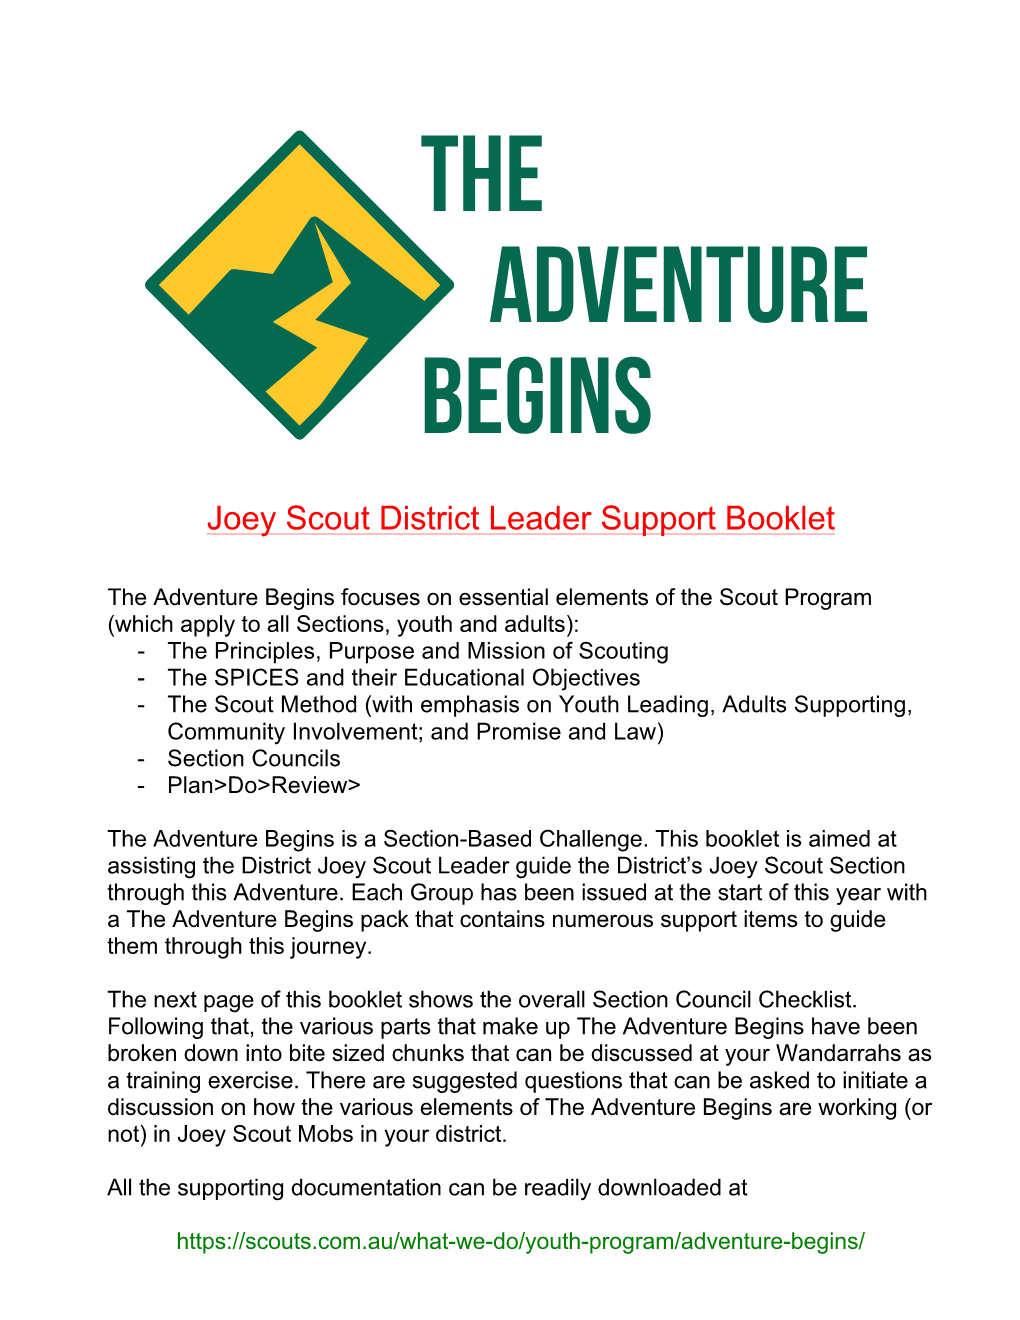 Joey Scout District Leader Support Booklet